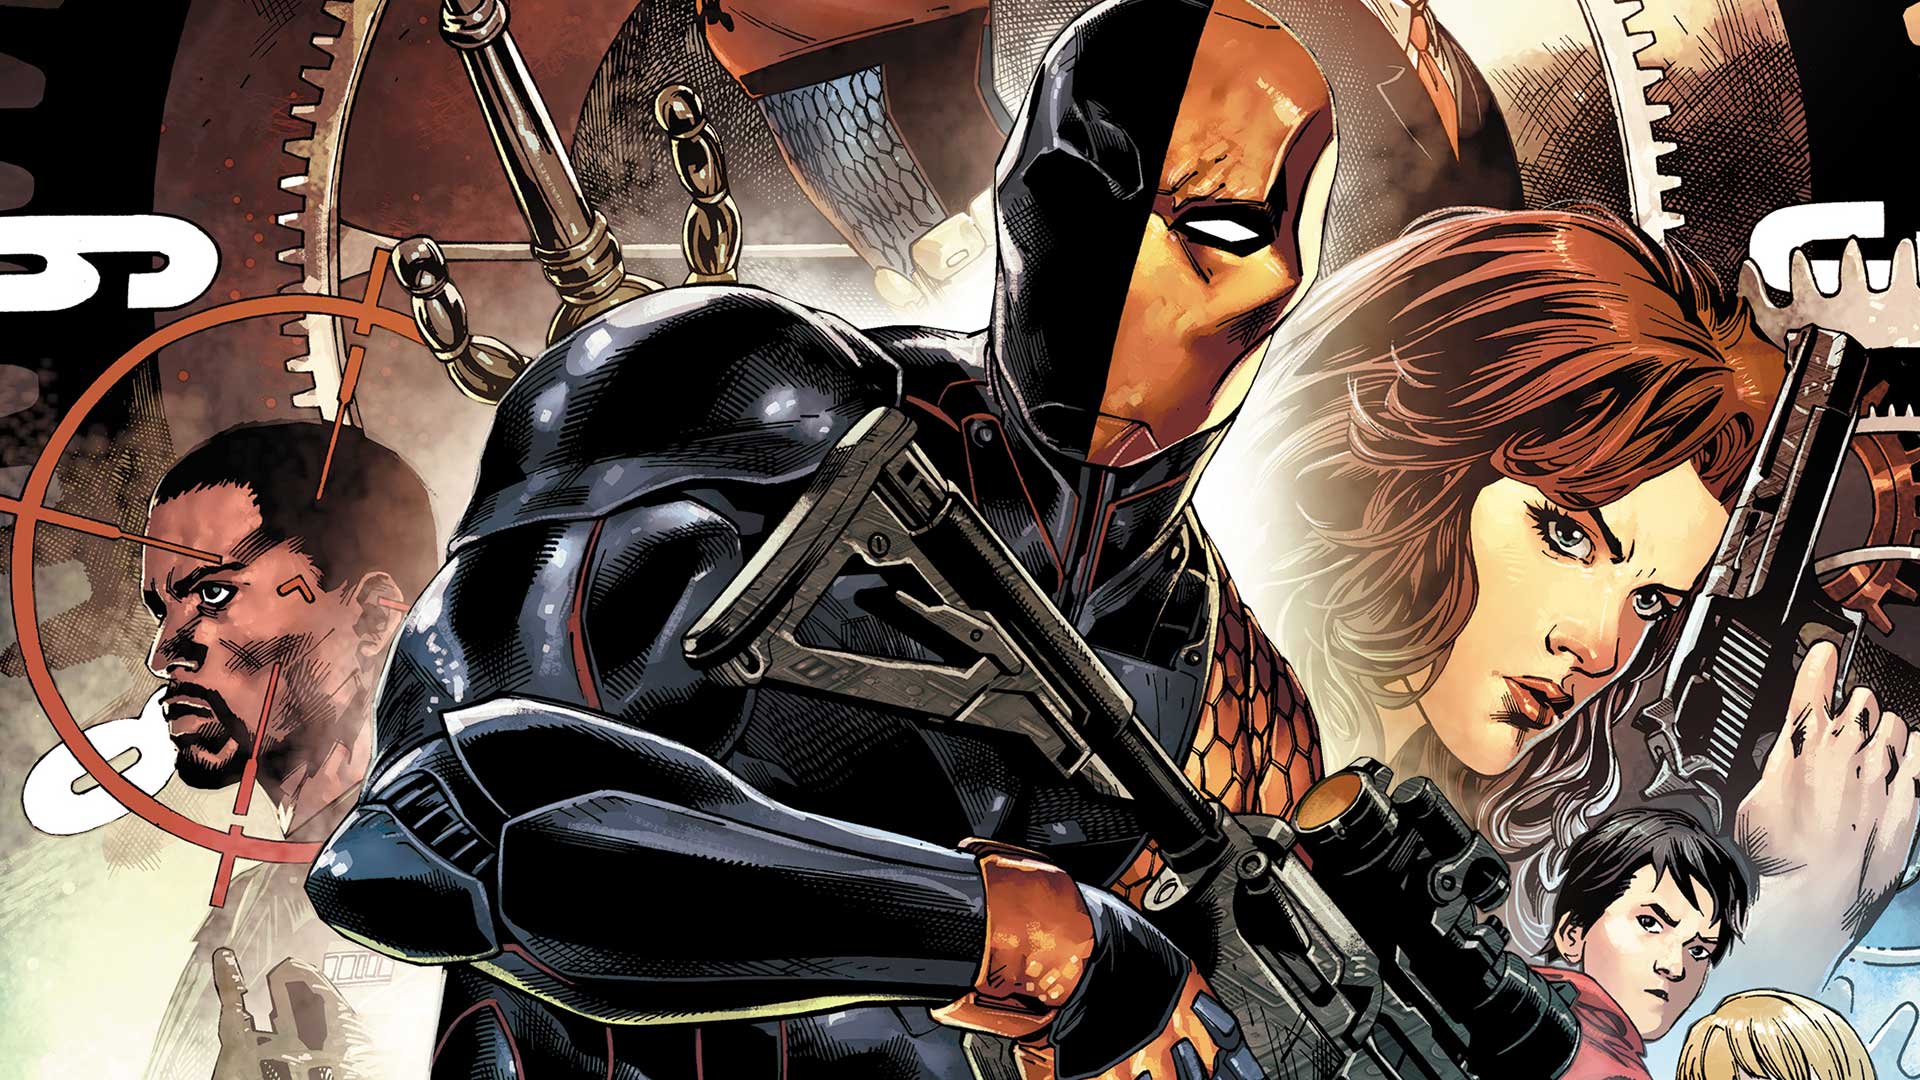 Should We Be Shocked by an Image from Deathstroke #2?